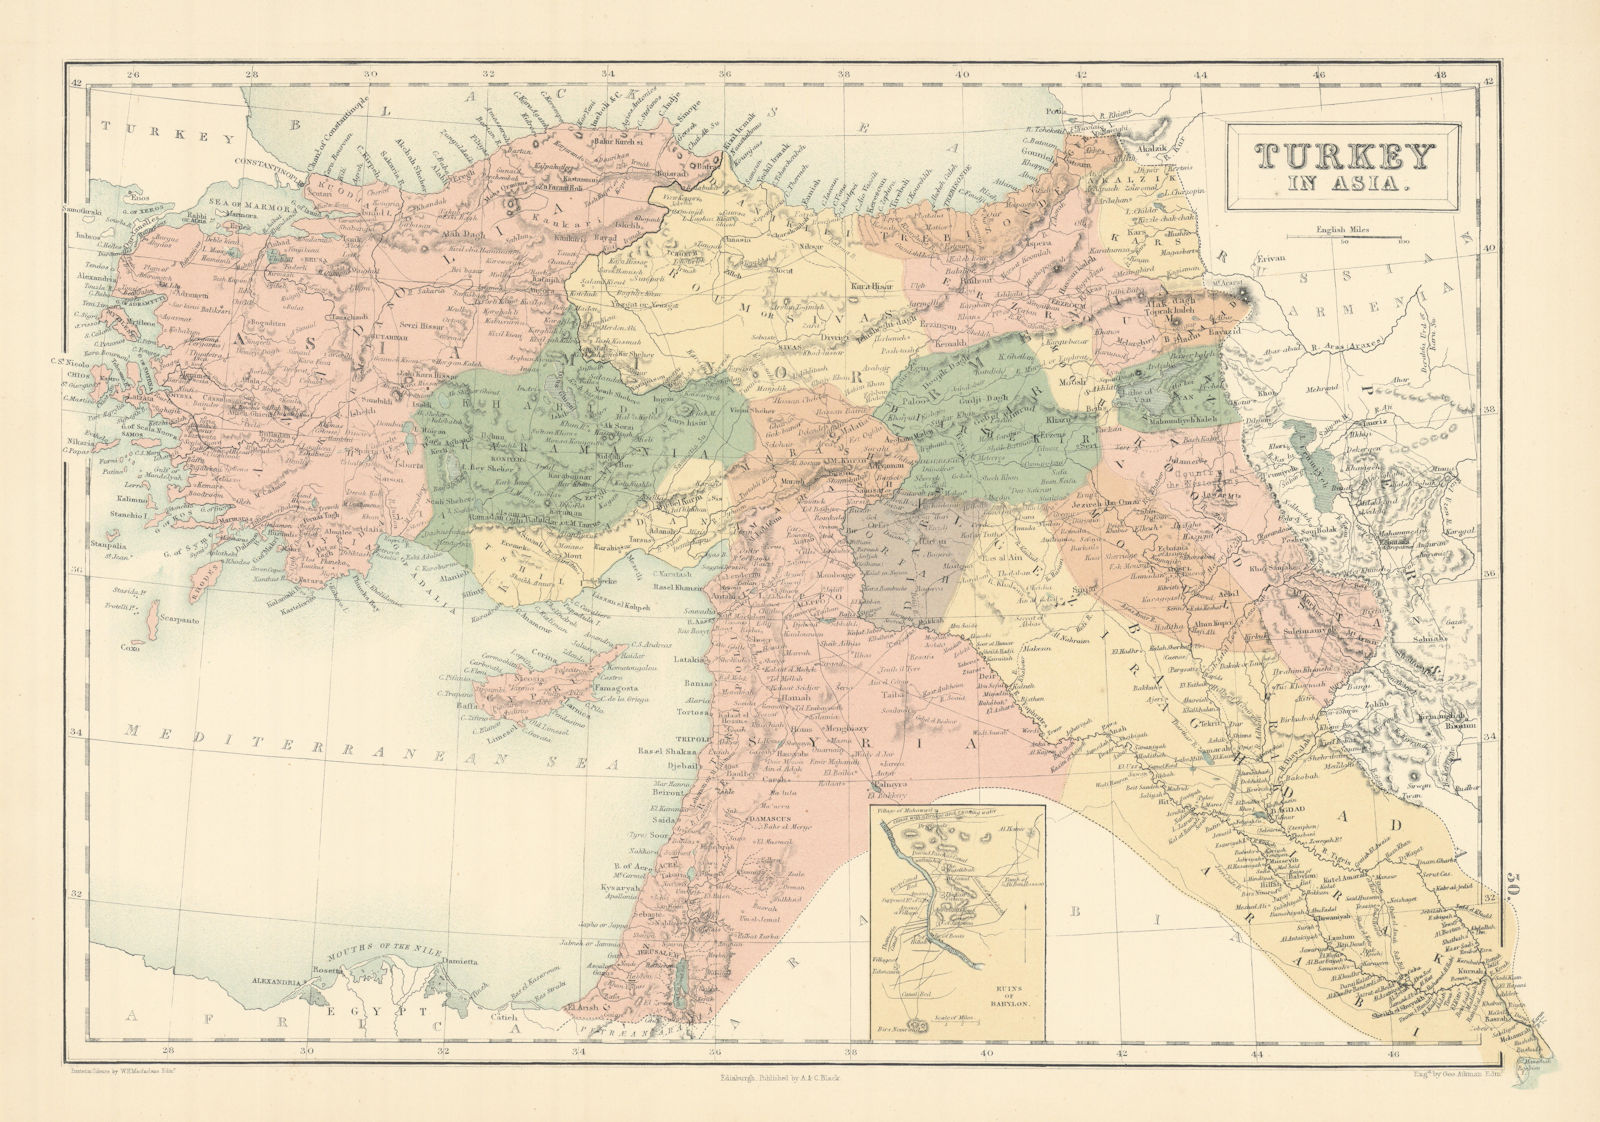 Associate Product Turkey in Asia. Ruins of Babylon. Levant Iraq Palestine. GEORGE AIKMAN 1862 map